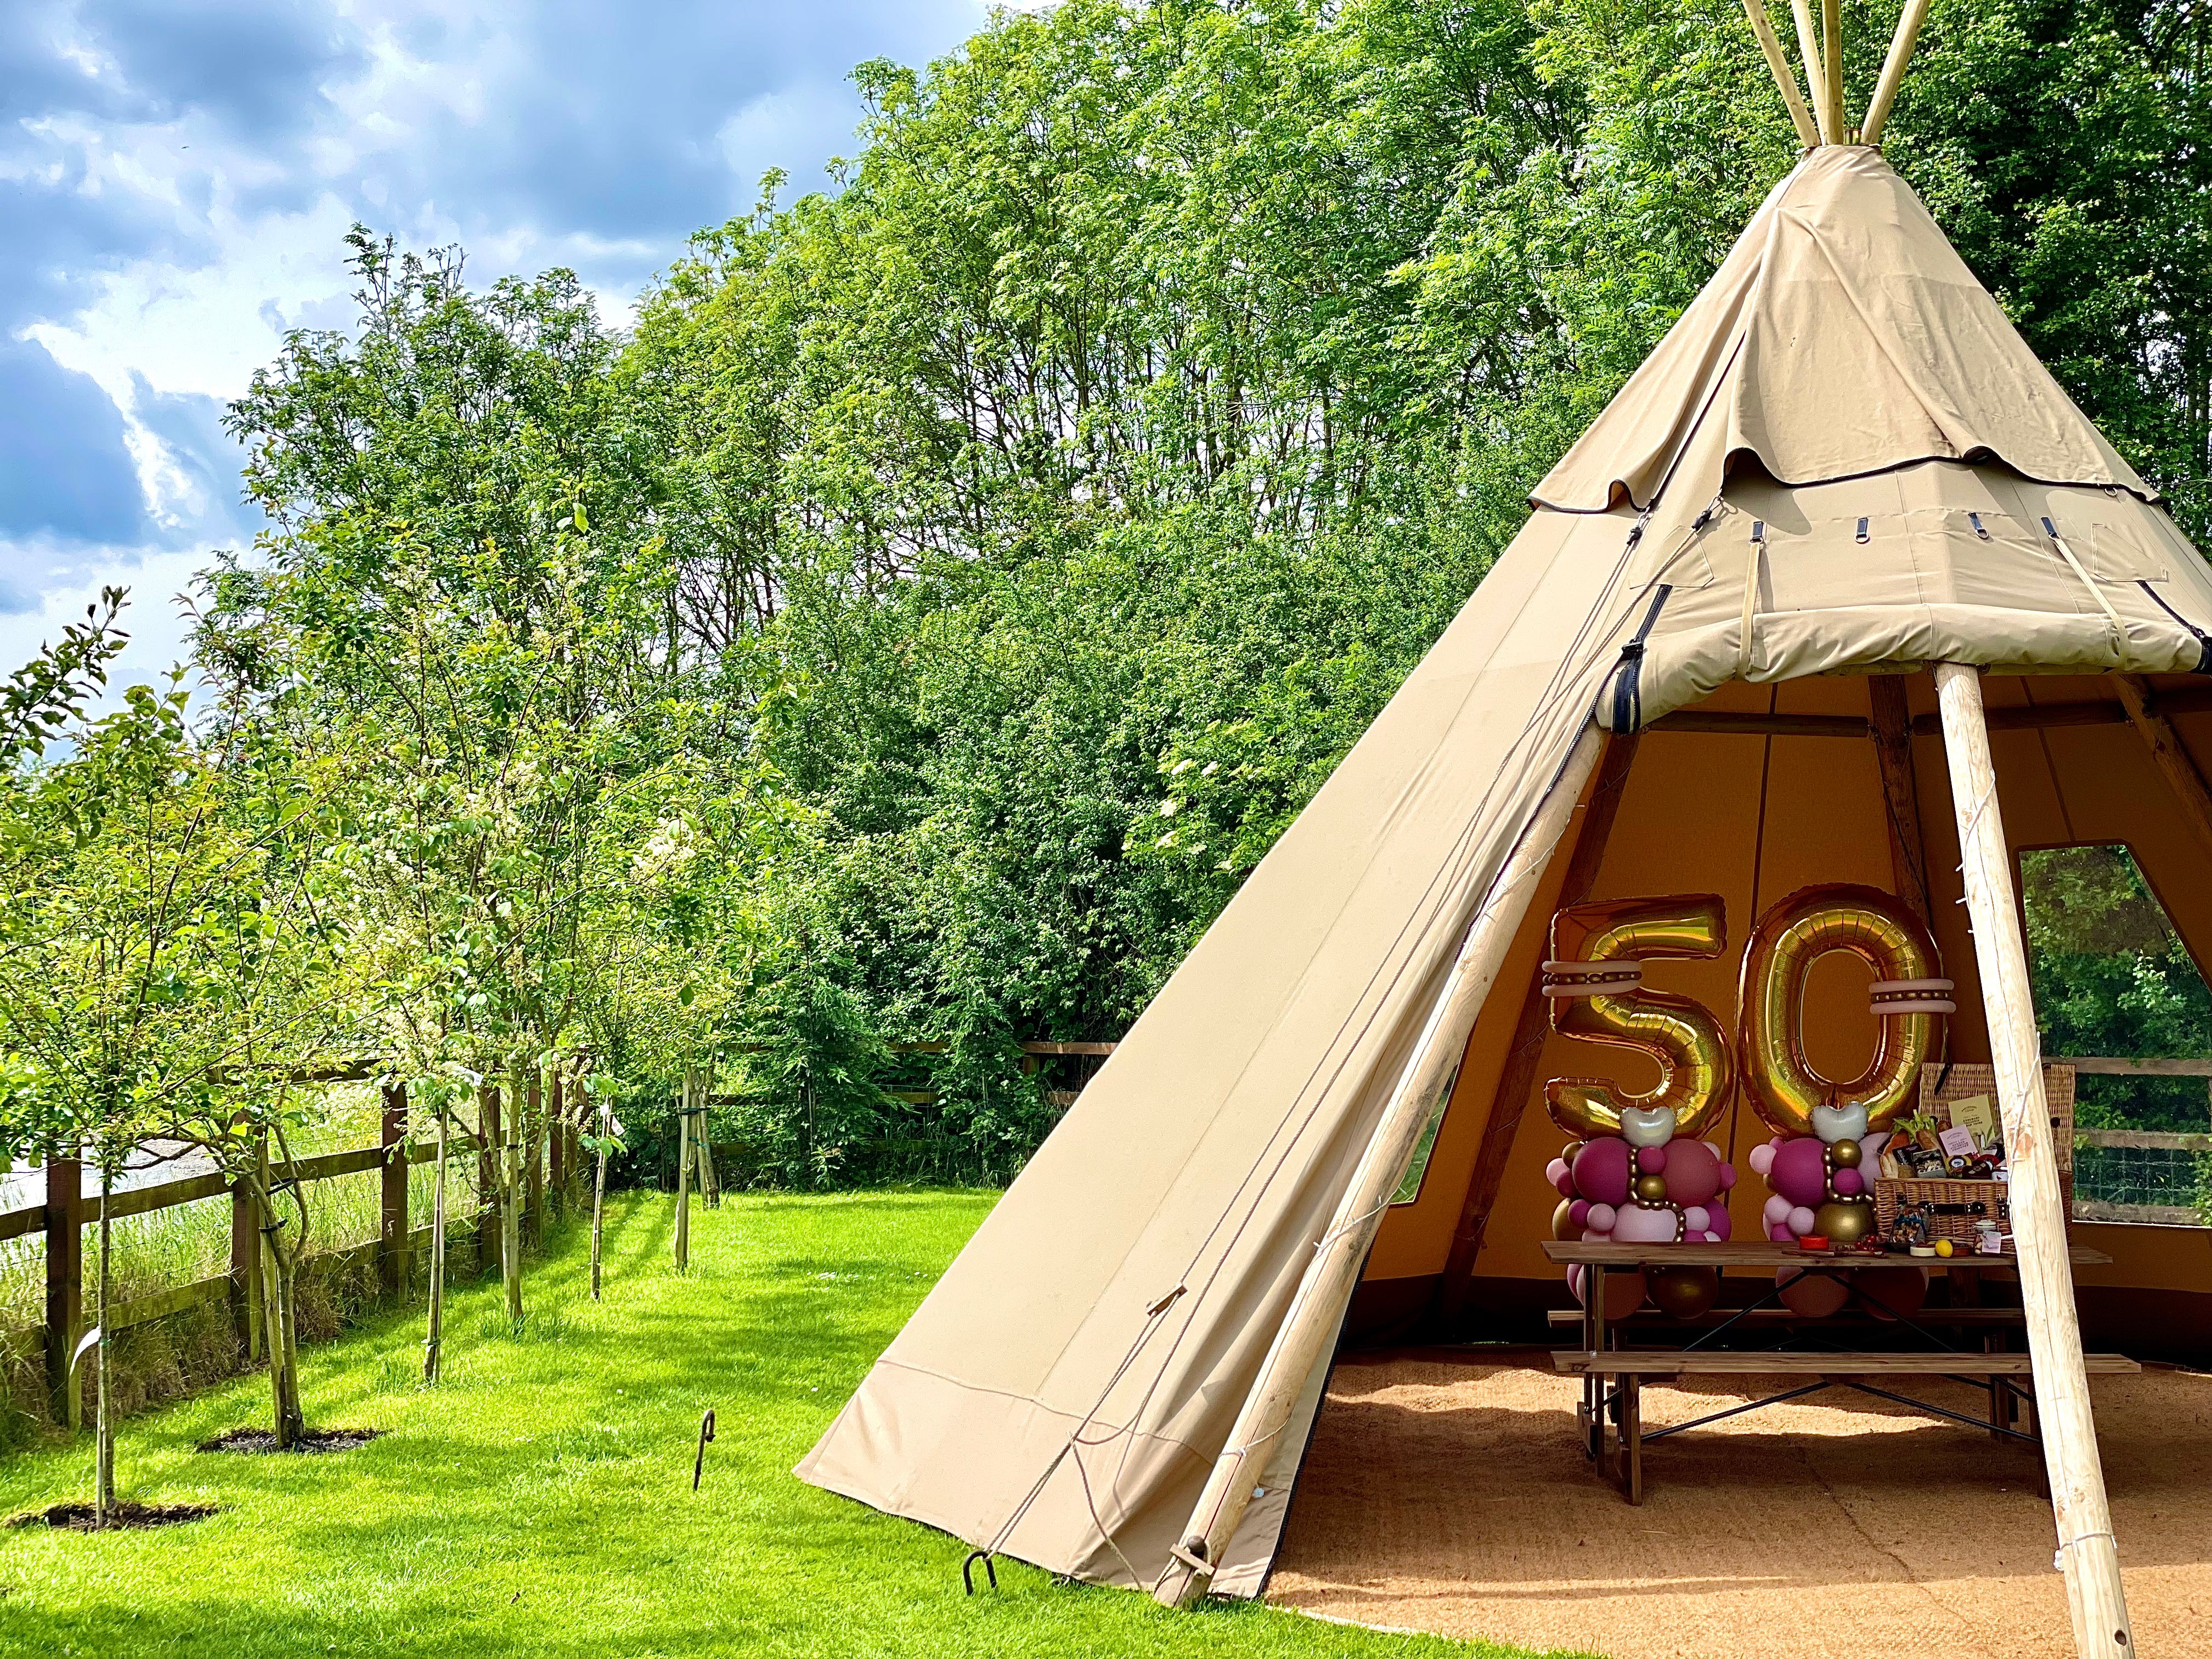 Tipi Event Package with Picnic Hamper, Balloon Stacks & Celebration Cake - for up to 20 people